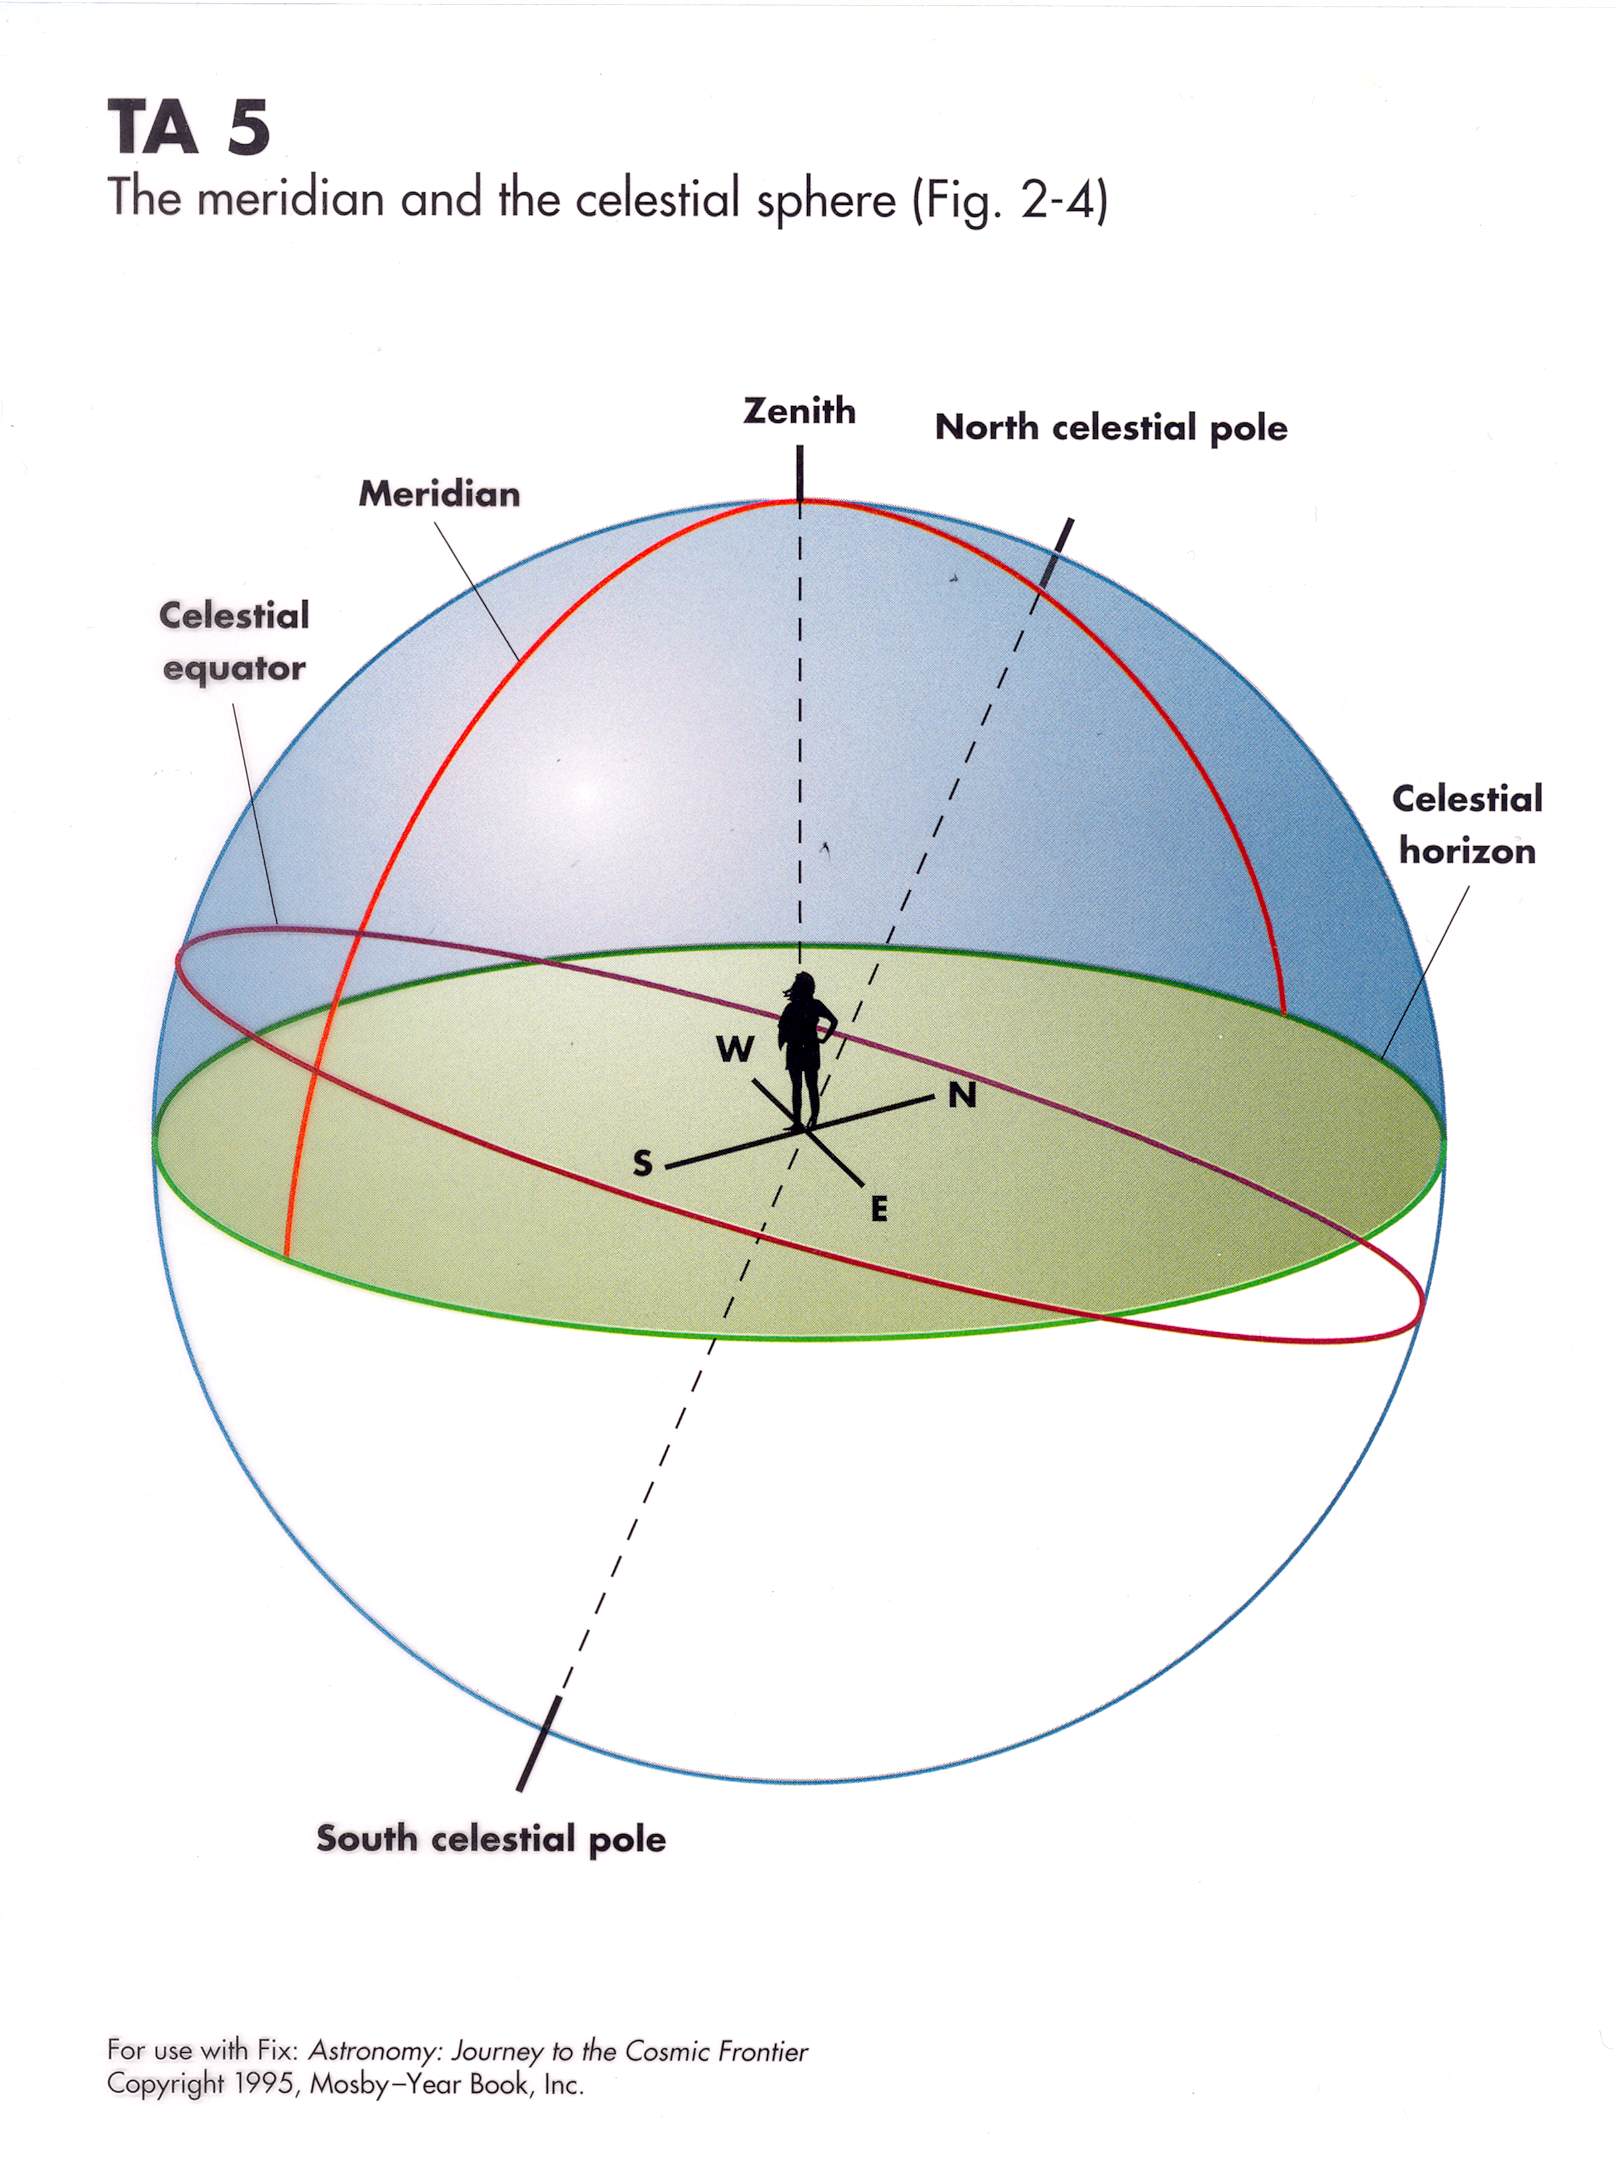 <p>a circular arc crossing the celestial sphere and passing through the local zenith and celestial pole</p>